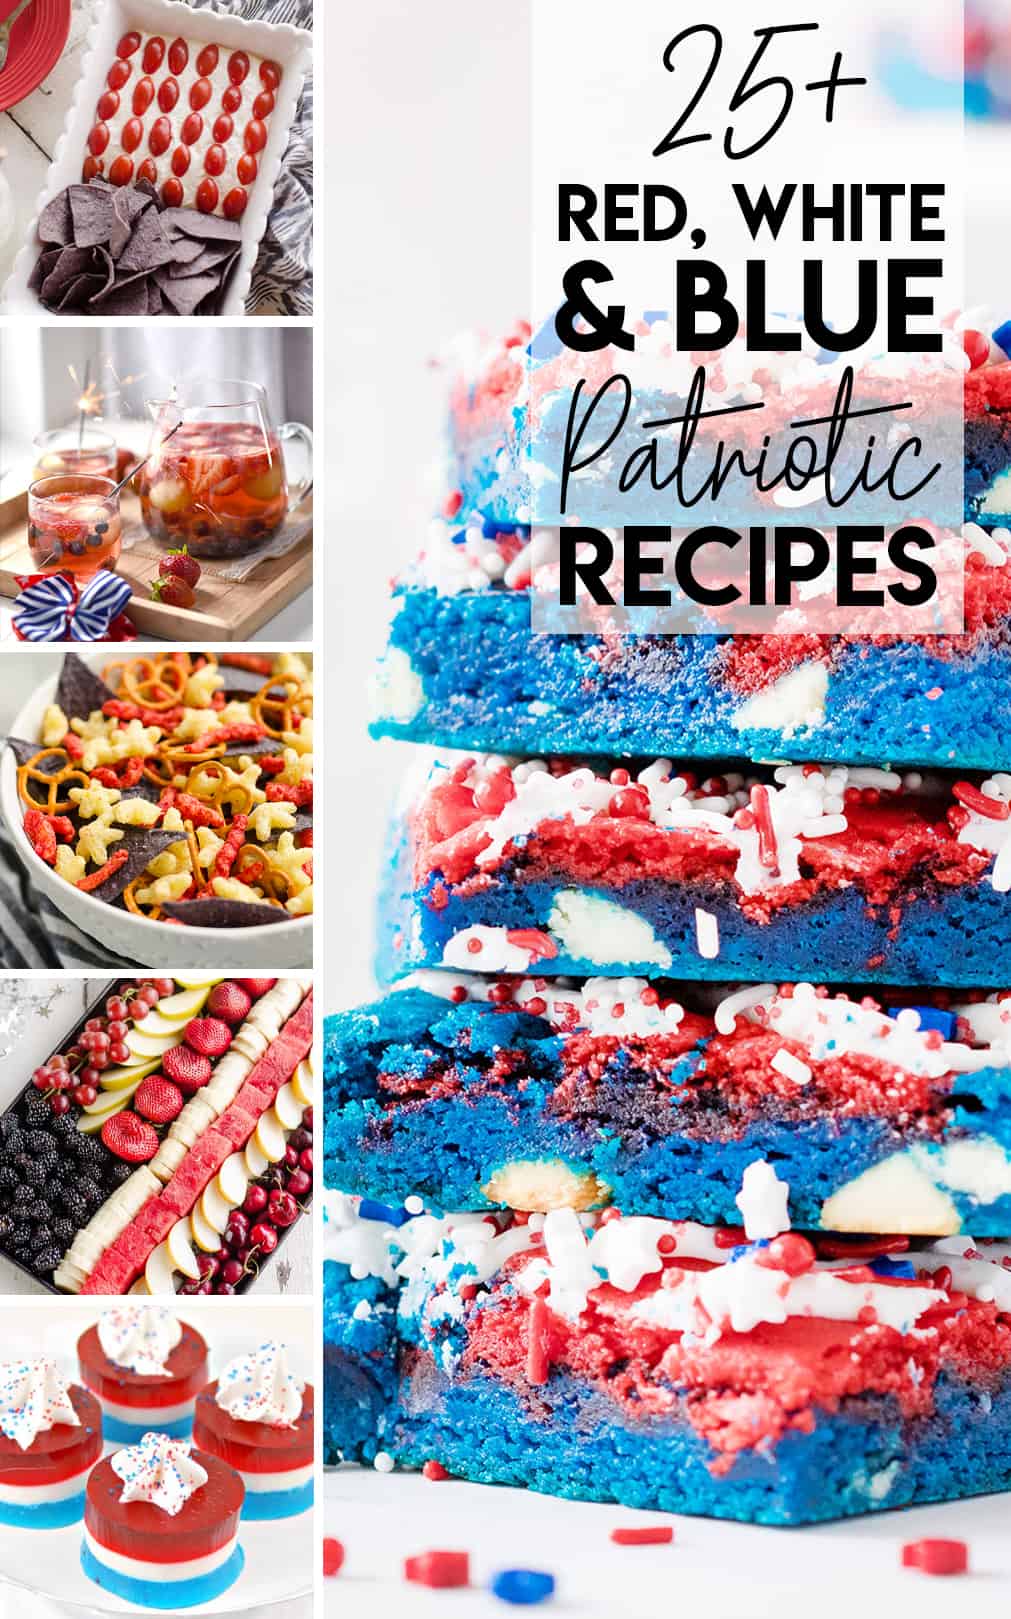 Red, White and Blue Patriotic Recipes